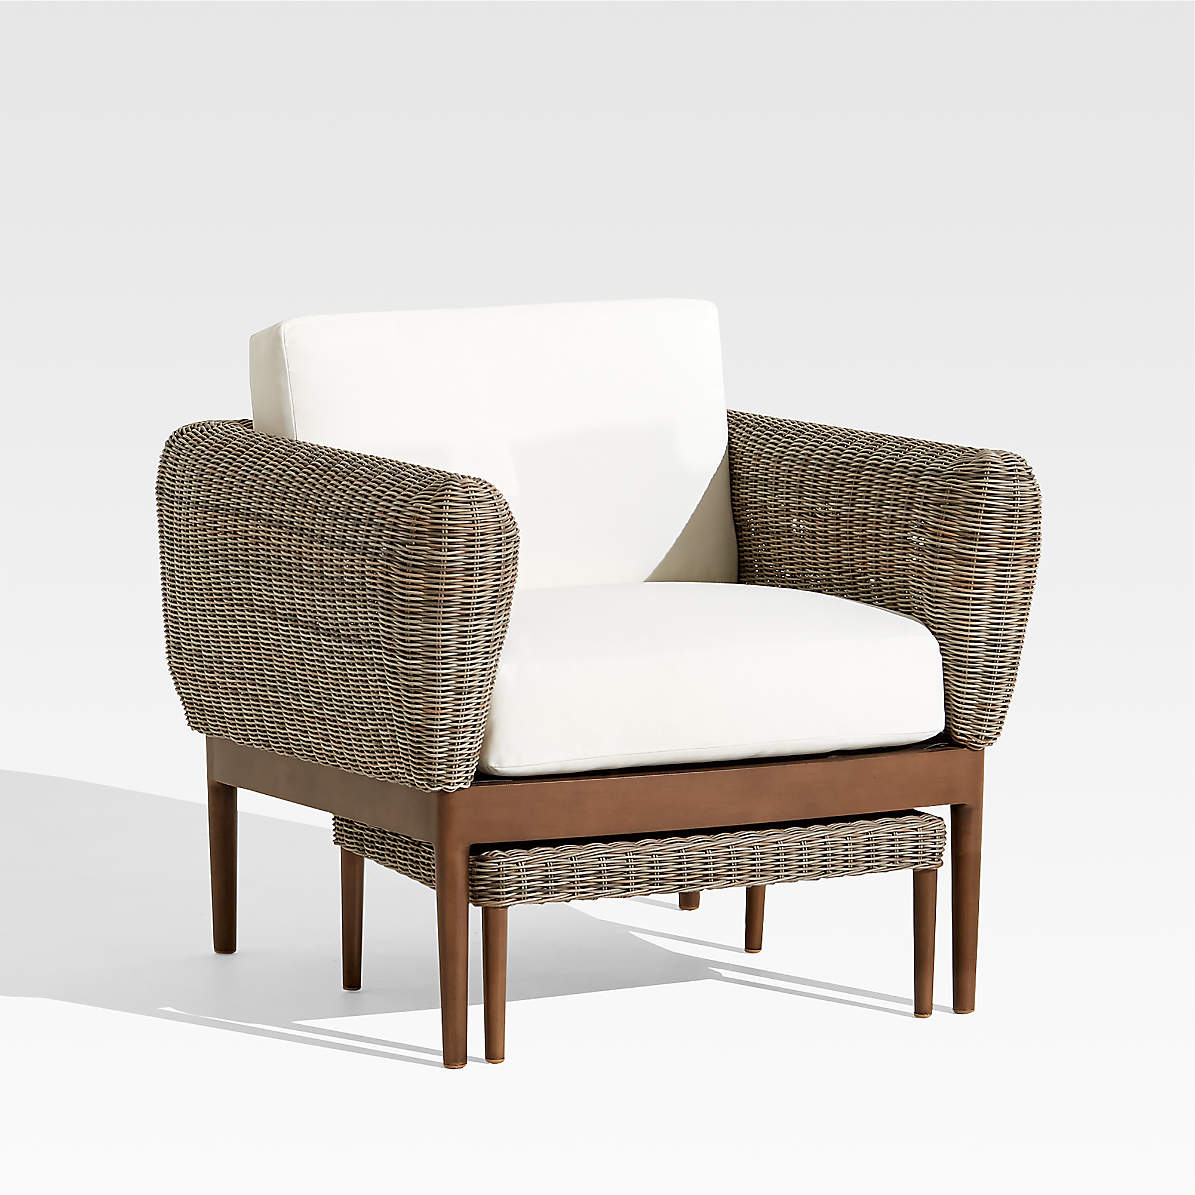 Outdoor Chair And Ottoman Canada - Corliving Outdoor Chair And Ottoman